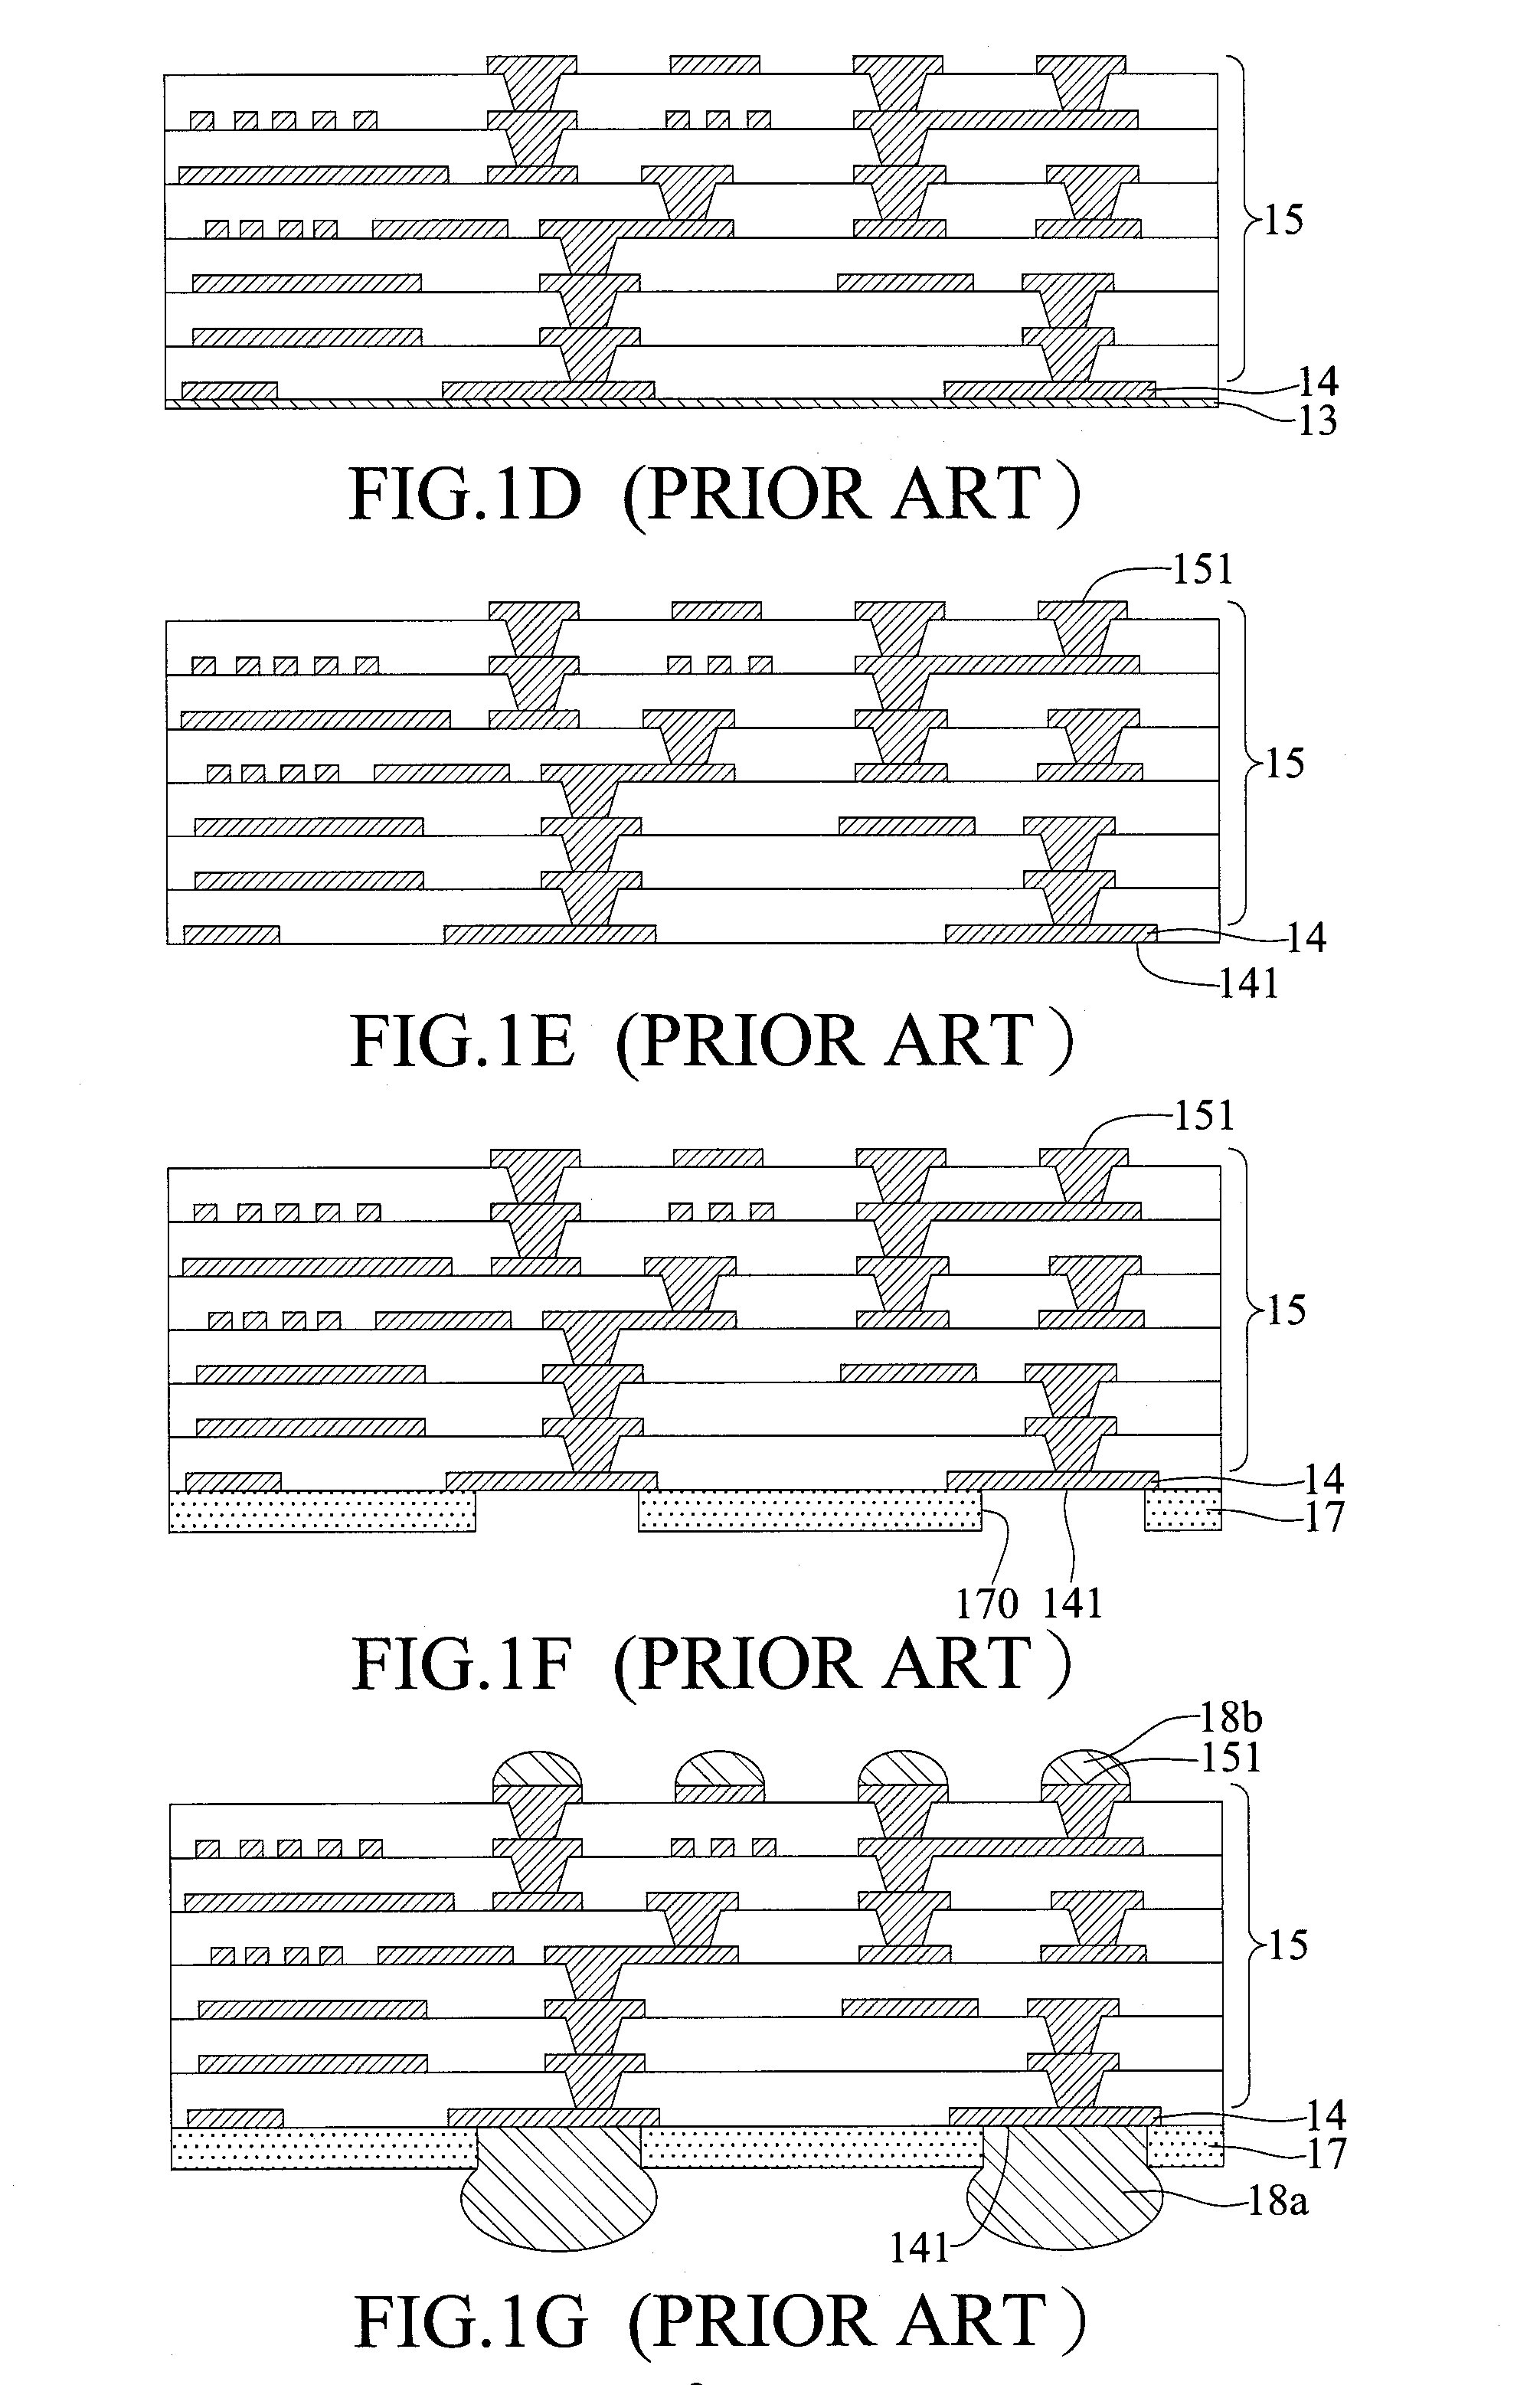 Carrier and method for fabricating coreless packaging substrate